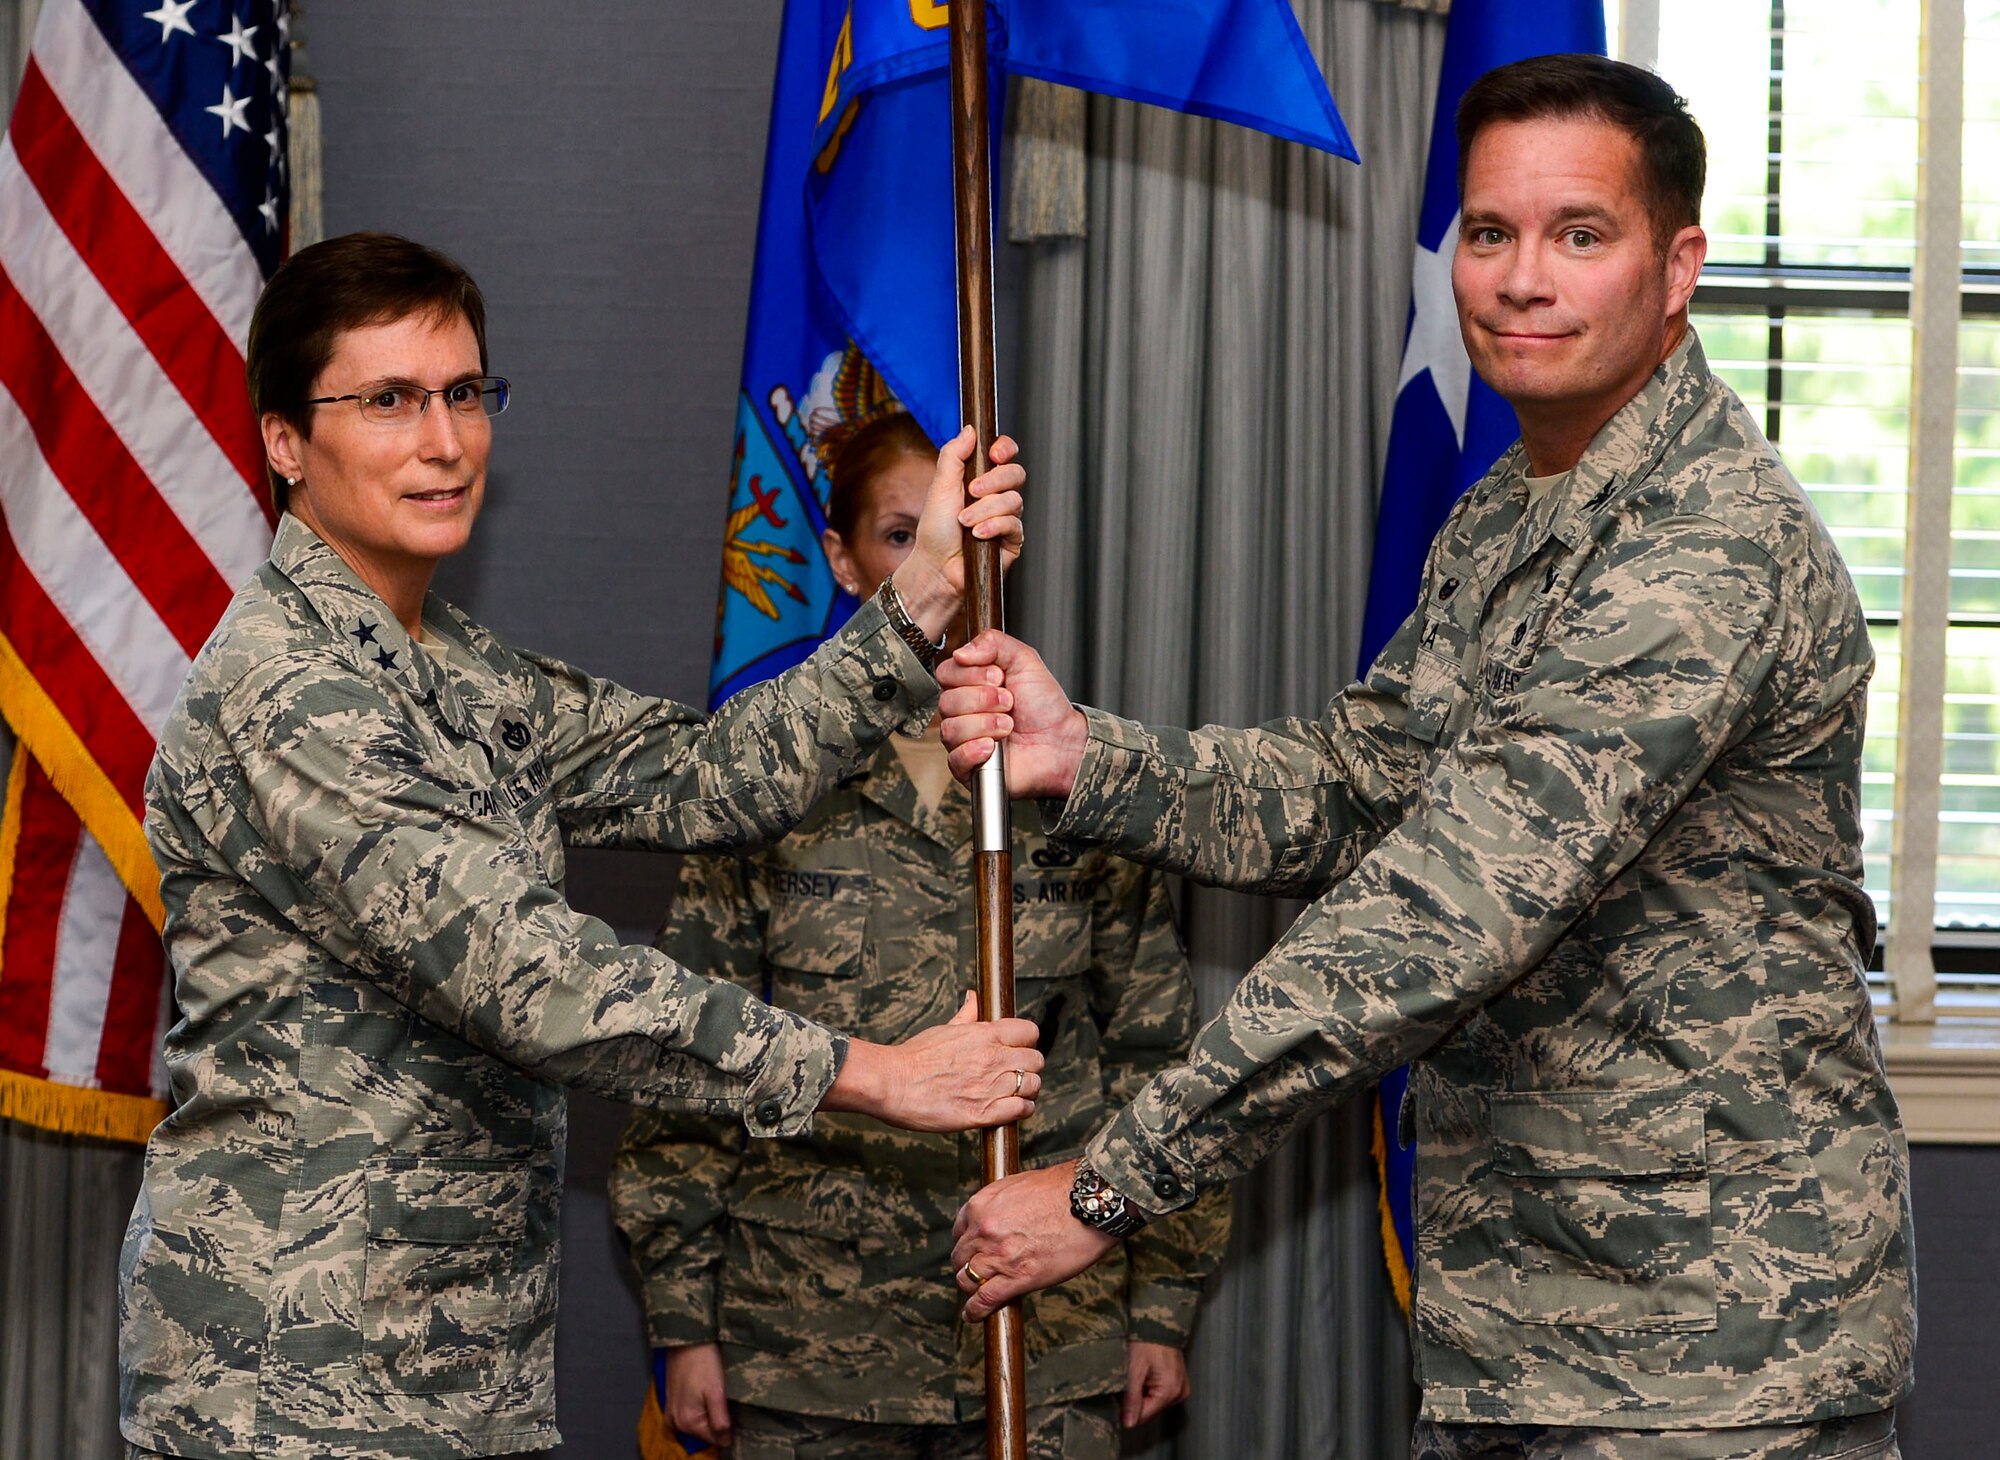 U.S. Air Force Maj. Gen. Theresa Carter, Air Force Installation and Mission Support Center commander, and Col. Russell Hula, participate in a ceremony marking Hula’s assumption of command of the detachment at Joint Base Langley-Eustis, Va., April 24, 2015. AFIMSC will perform major command-level installation and mission support activities, and serve as the single intermediate-level headquarters providing installation and expeditionary support to 77 major installations, 10 MAJCOMs and two direct reporting units. (U.S. Air Force photo/Senior Airman Kayla Newman/Released)